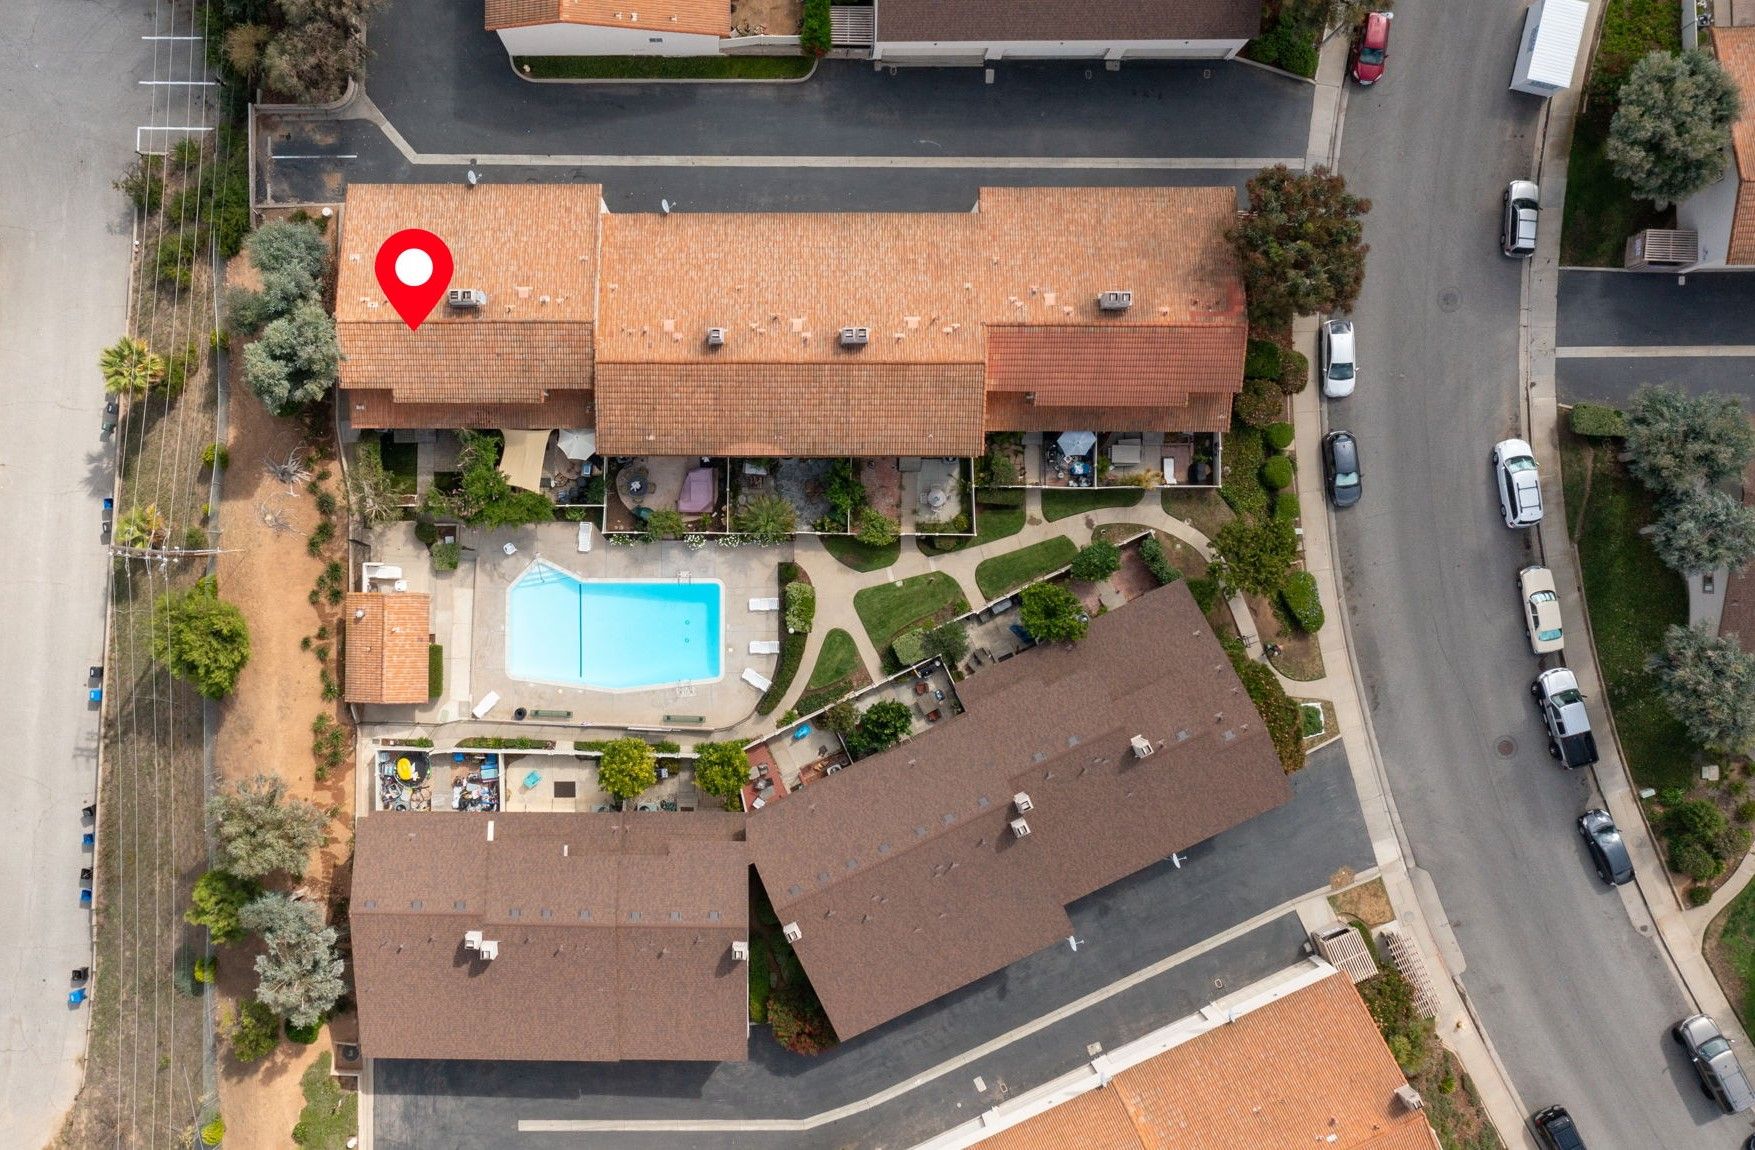 Aerial view of unit & fenced private front yard showing proximity to gated & somewhat secluded community pool (1 of multiple pools) located just outside unit's front gate.